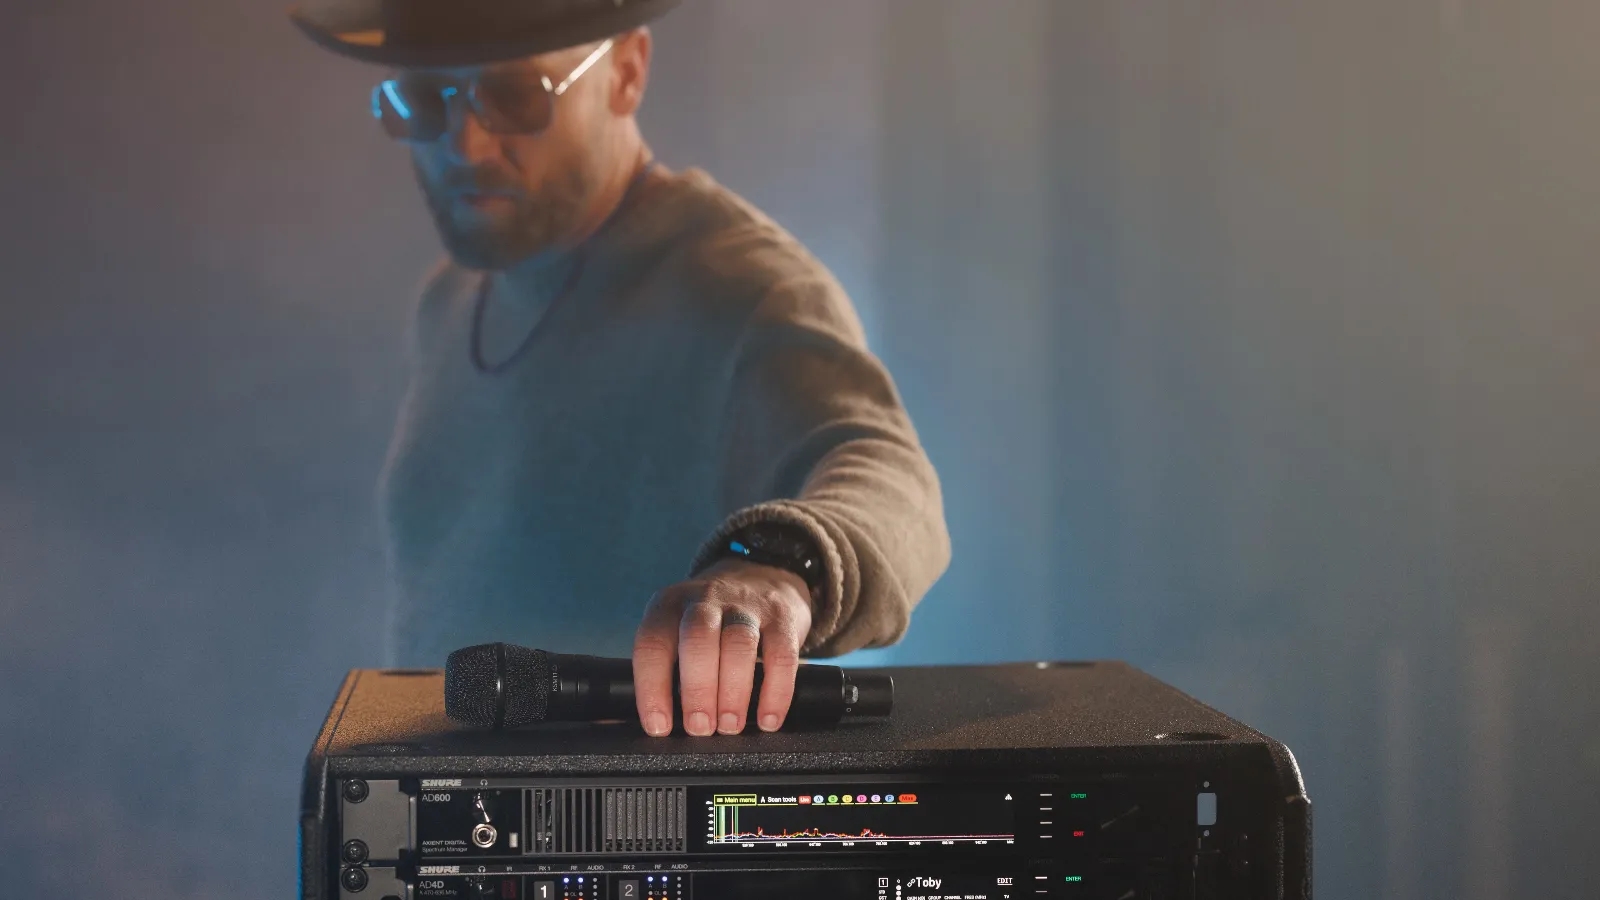 TobyMac picking up KSM11 off of rack with AD600 and Axient Digital